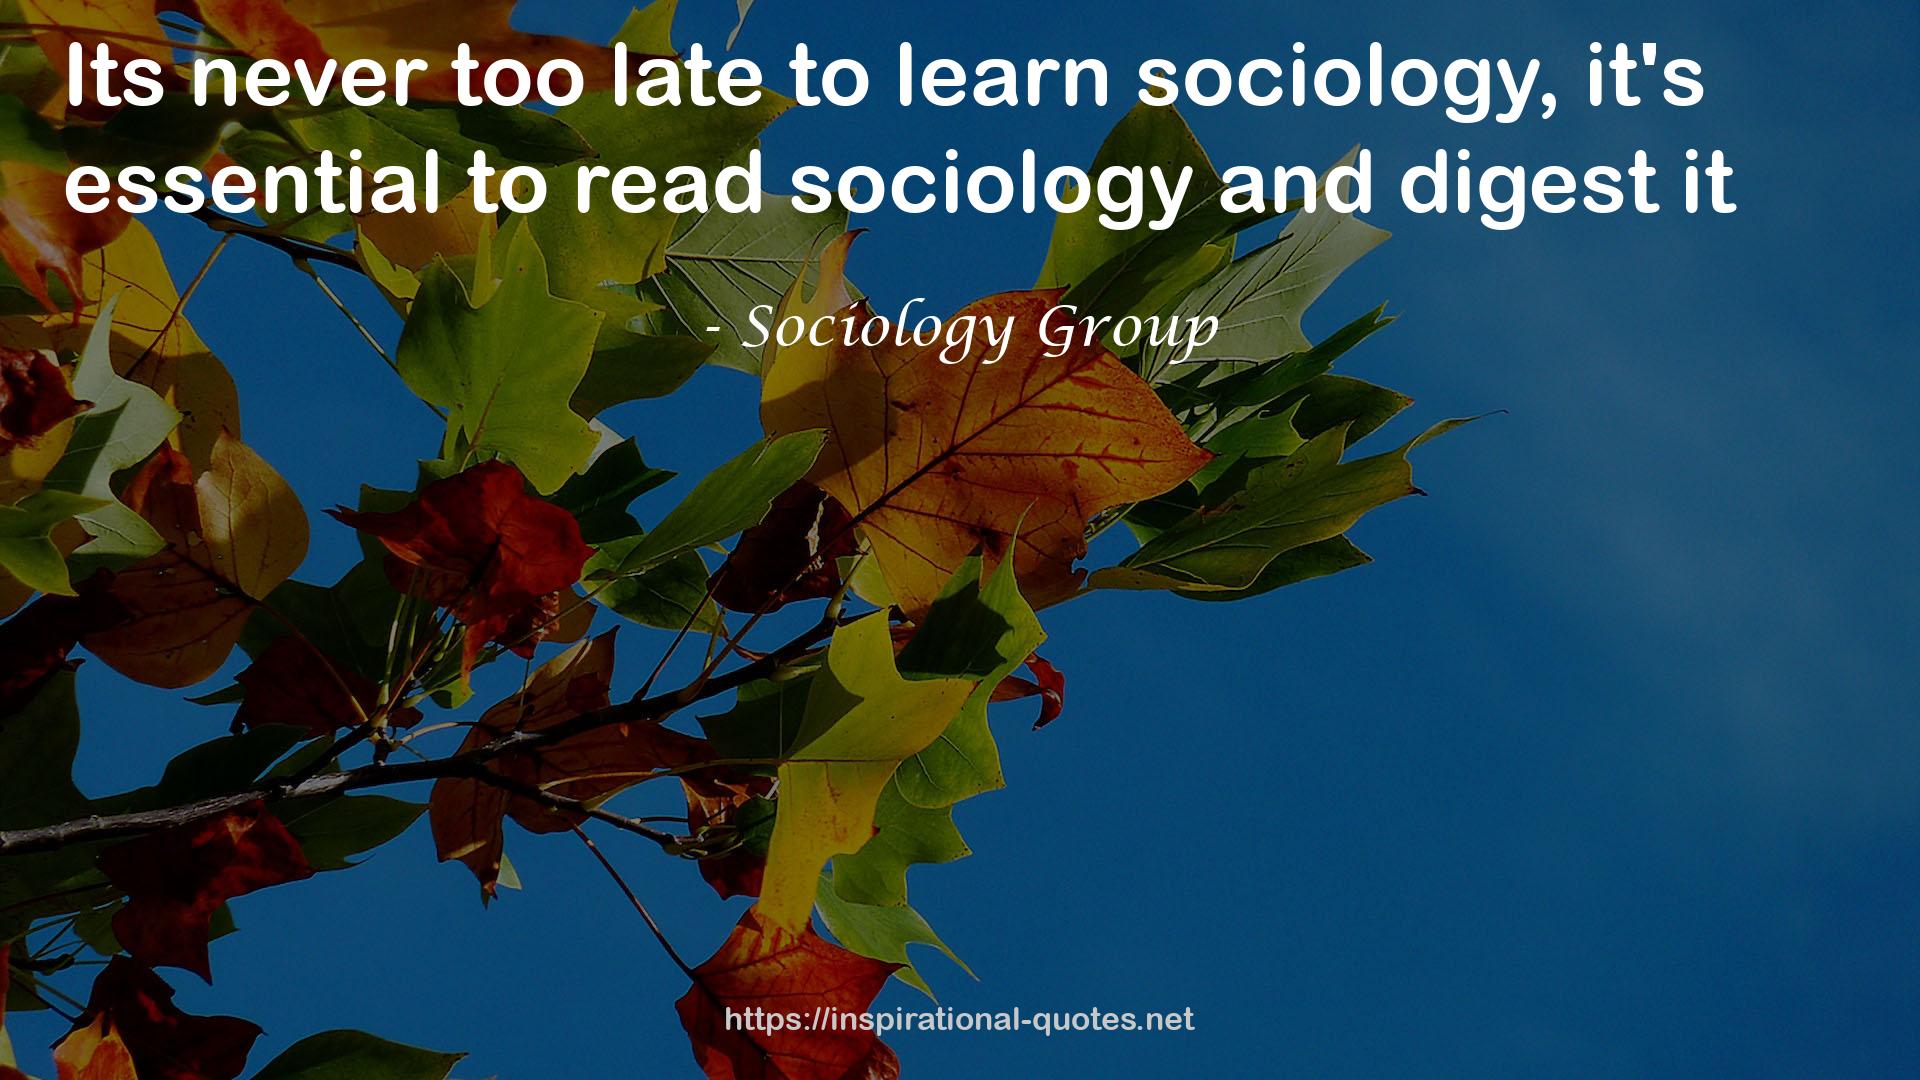 Sociology Group QUOTES